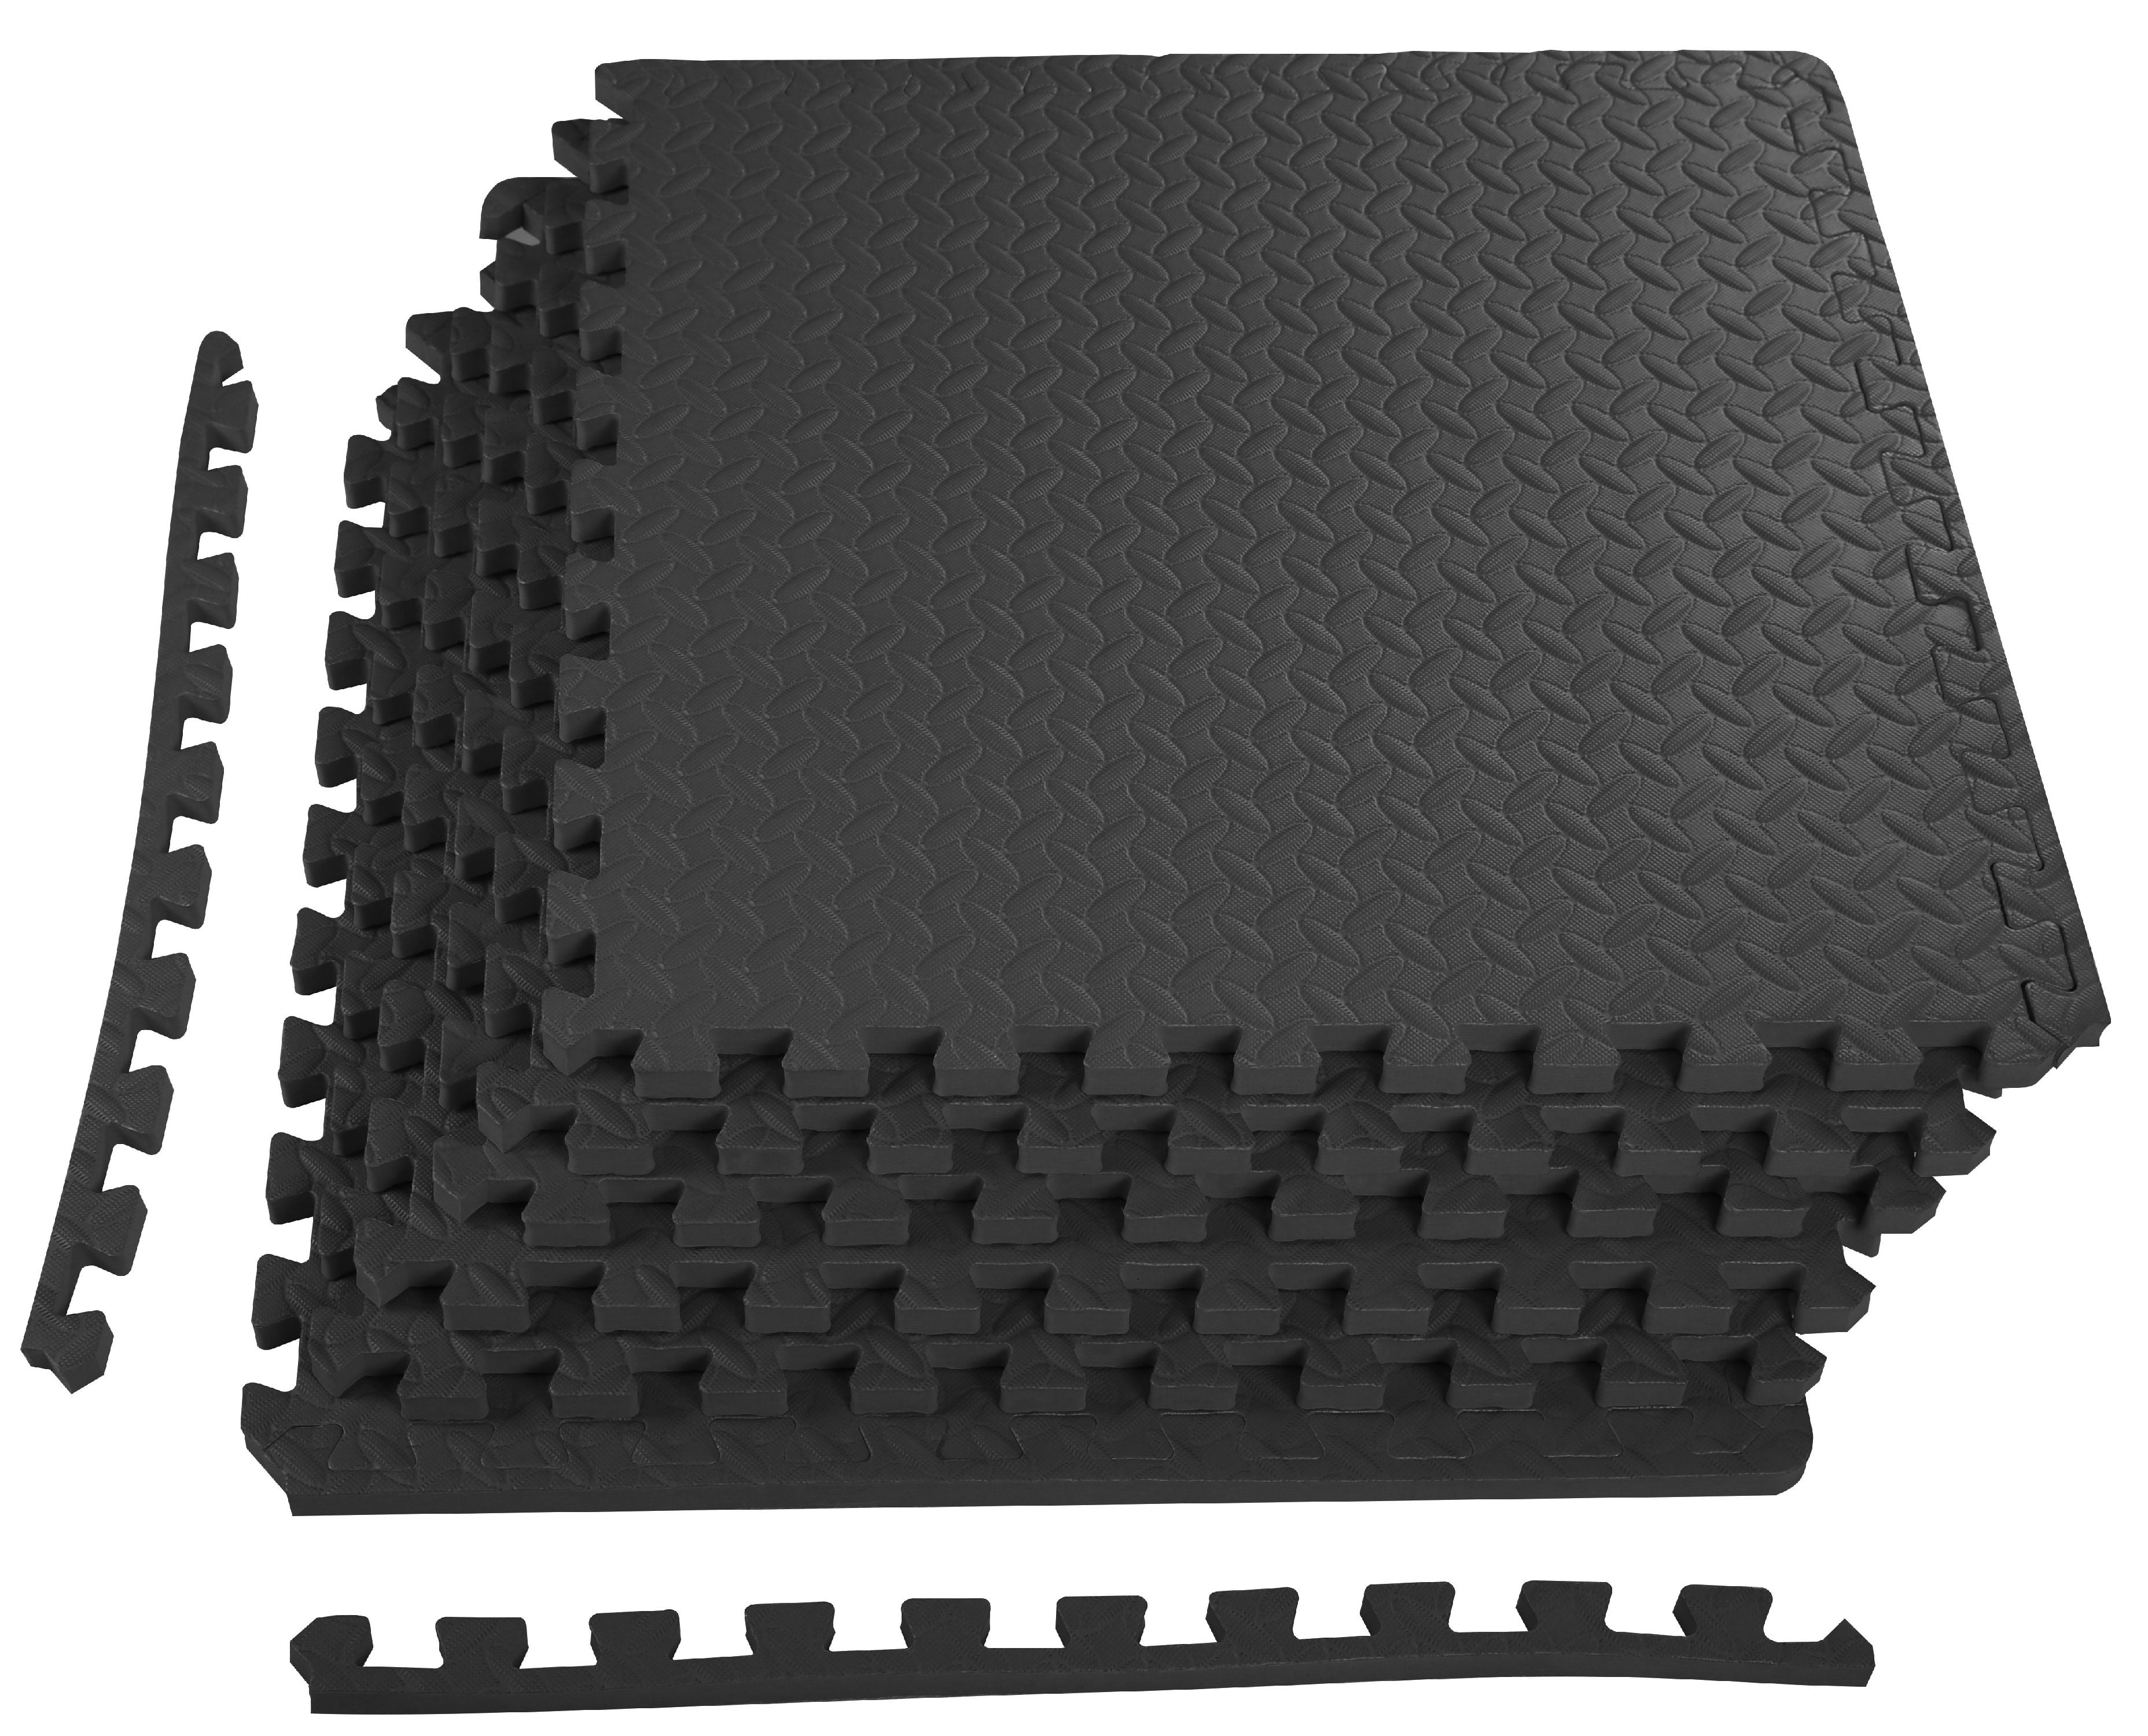 StillCool Fitness Mat Mulitifuctional Protective Flooring Puzzle Mat for Home Gym Workout 20 Piece 0.4 Thick EVA Foam Interlocking Tiles with Borders 12*12 